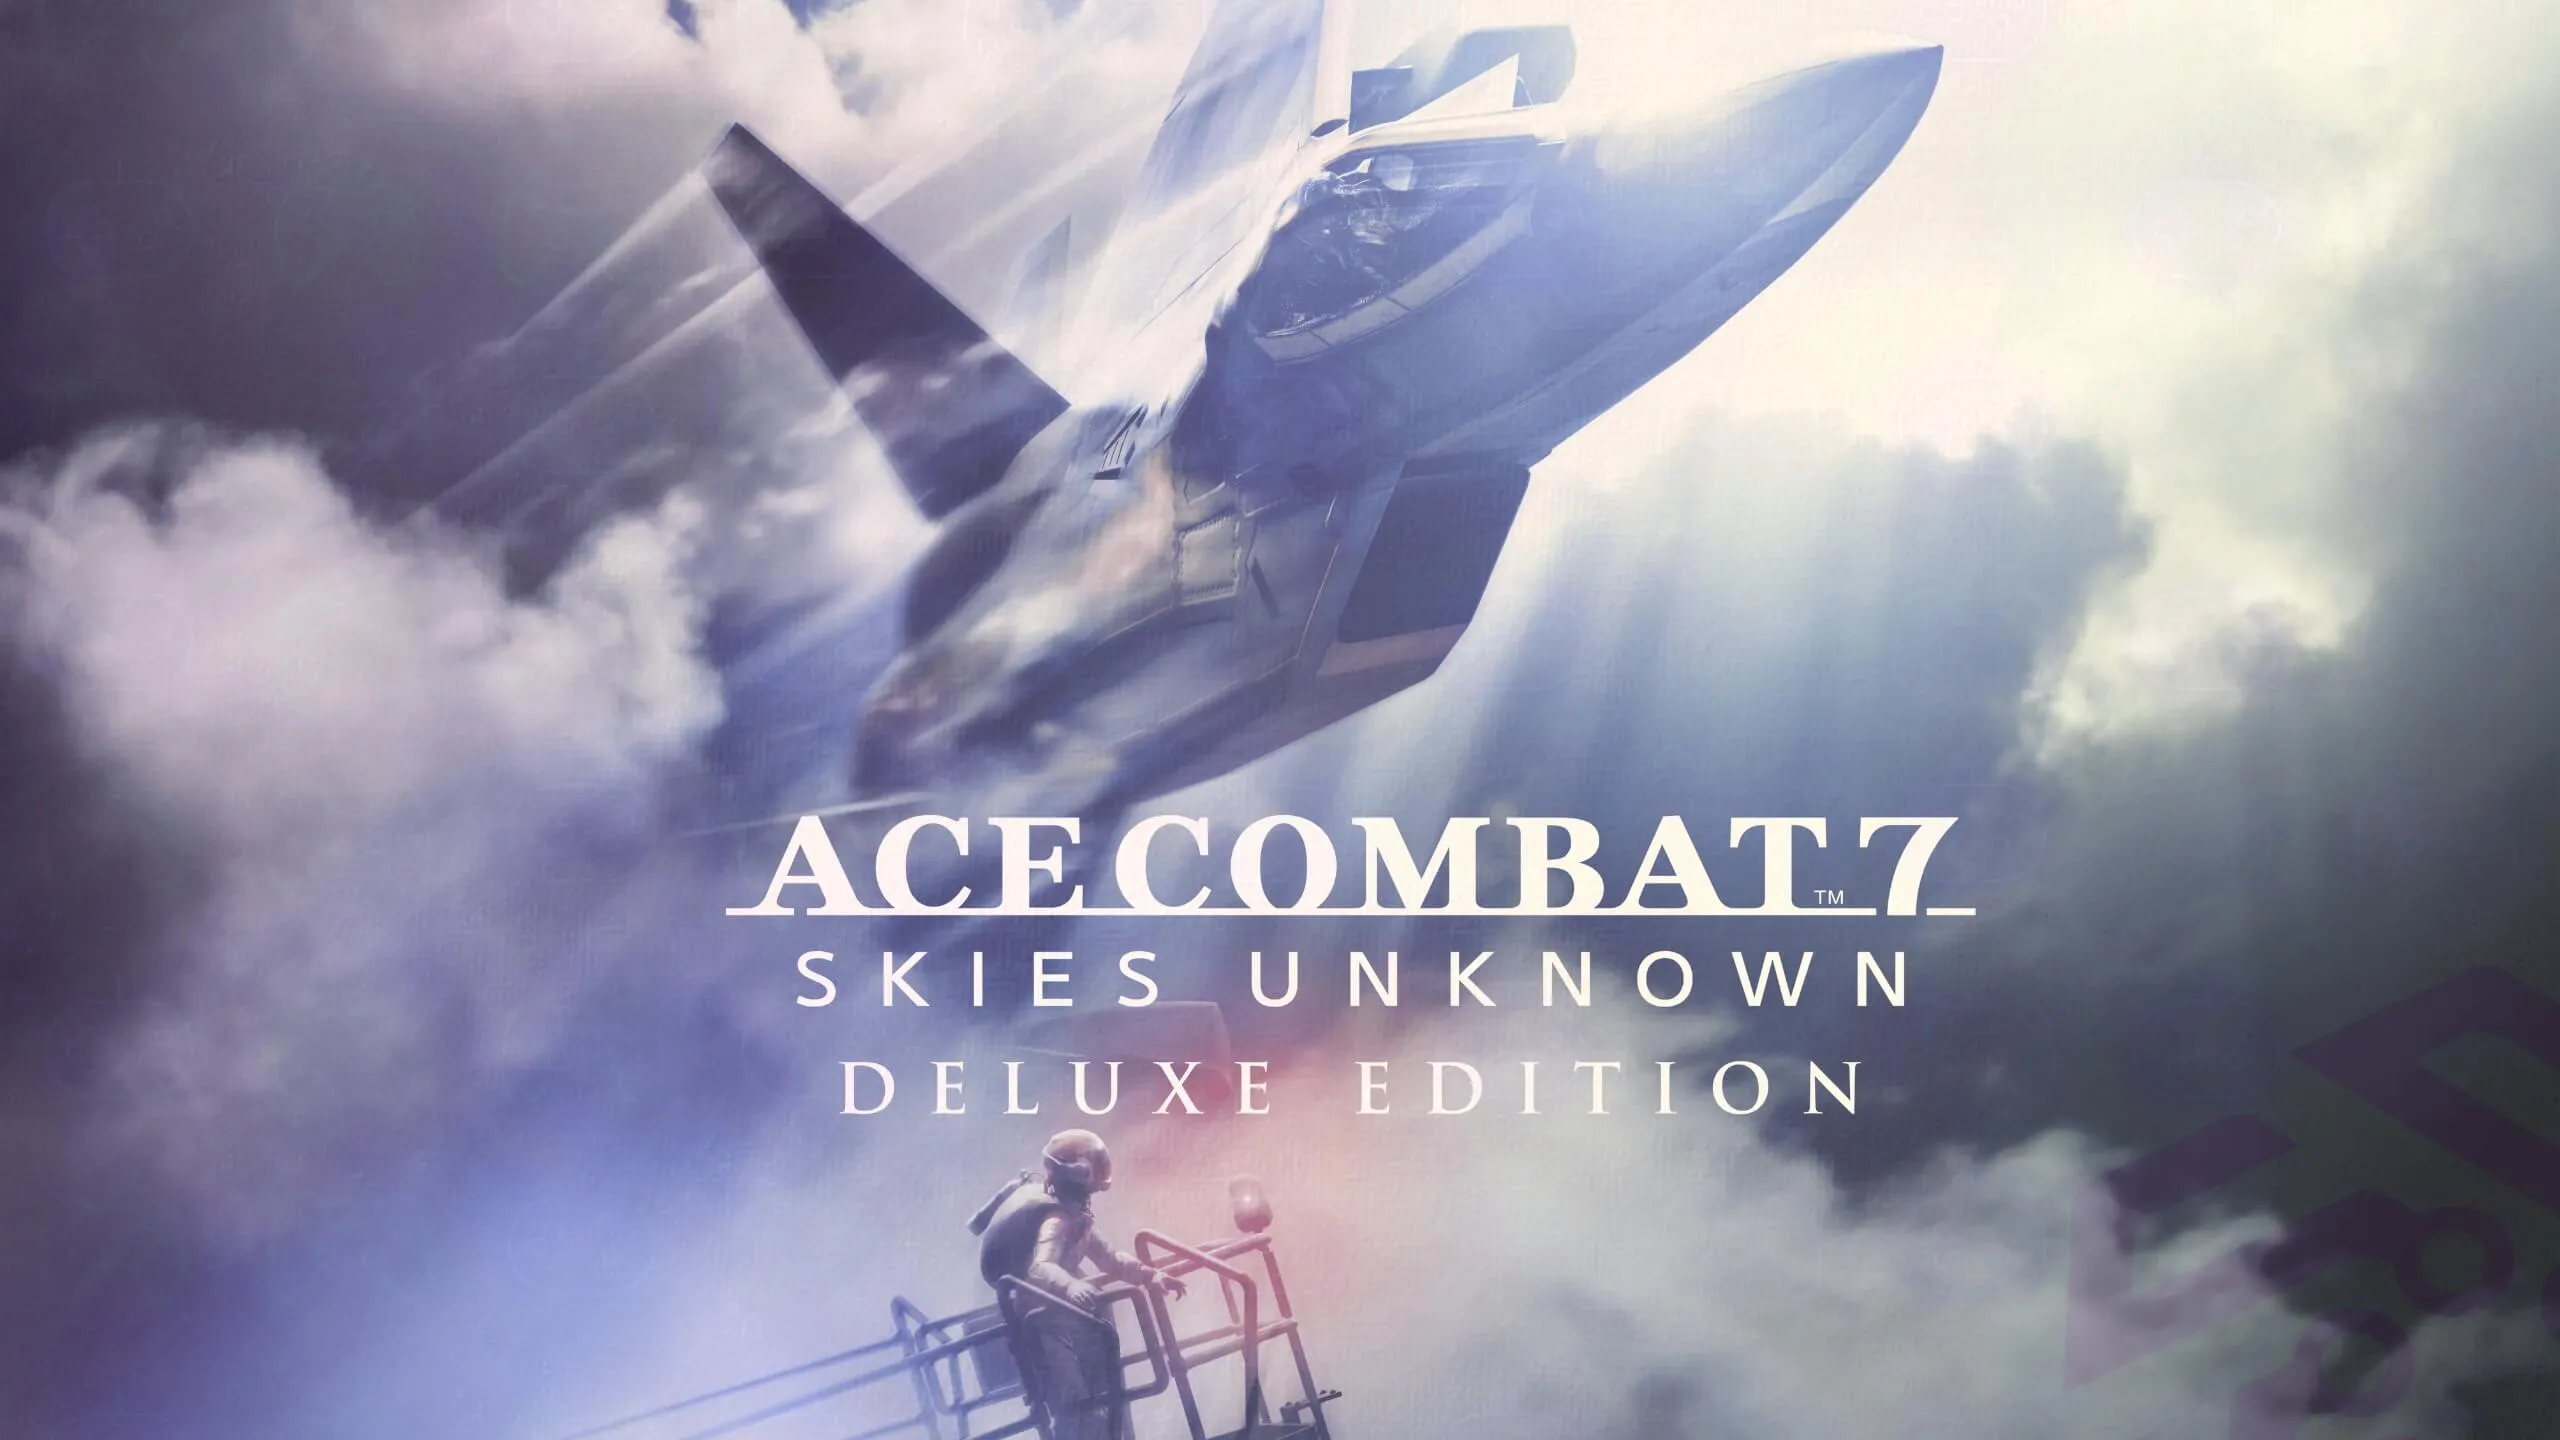 Ace combat 7 skies unknown deluxe edition key art